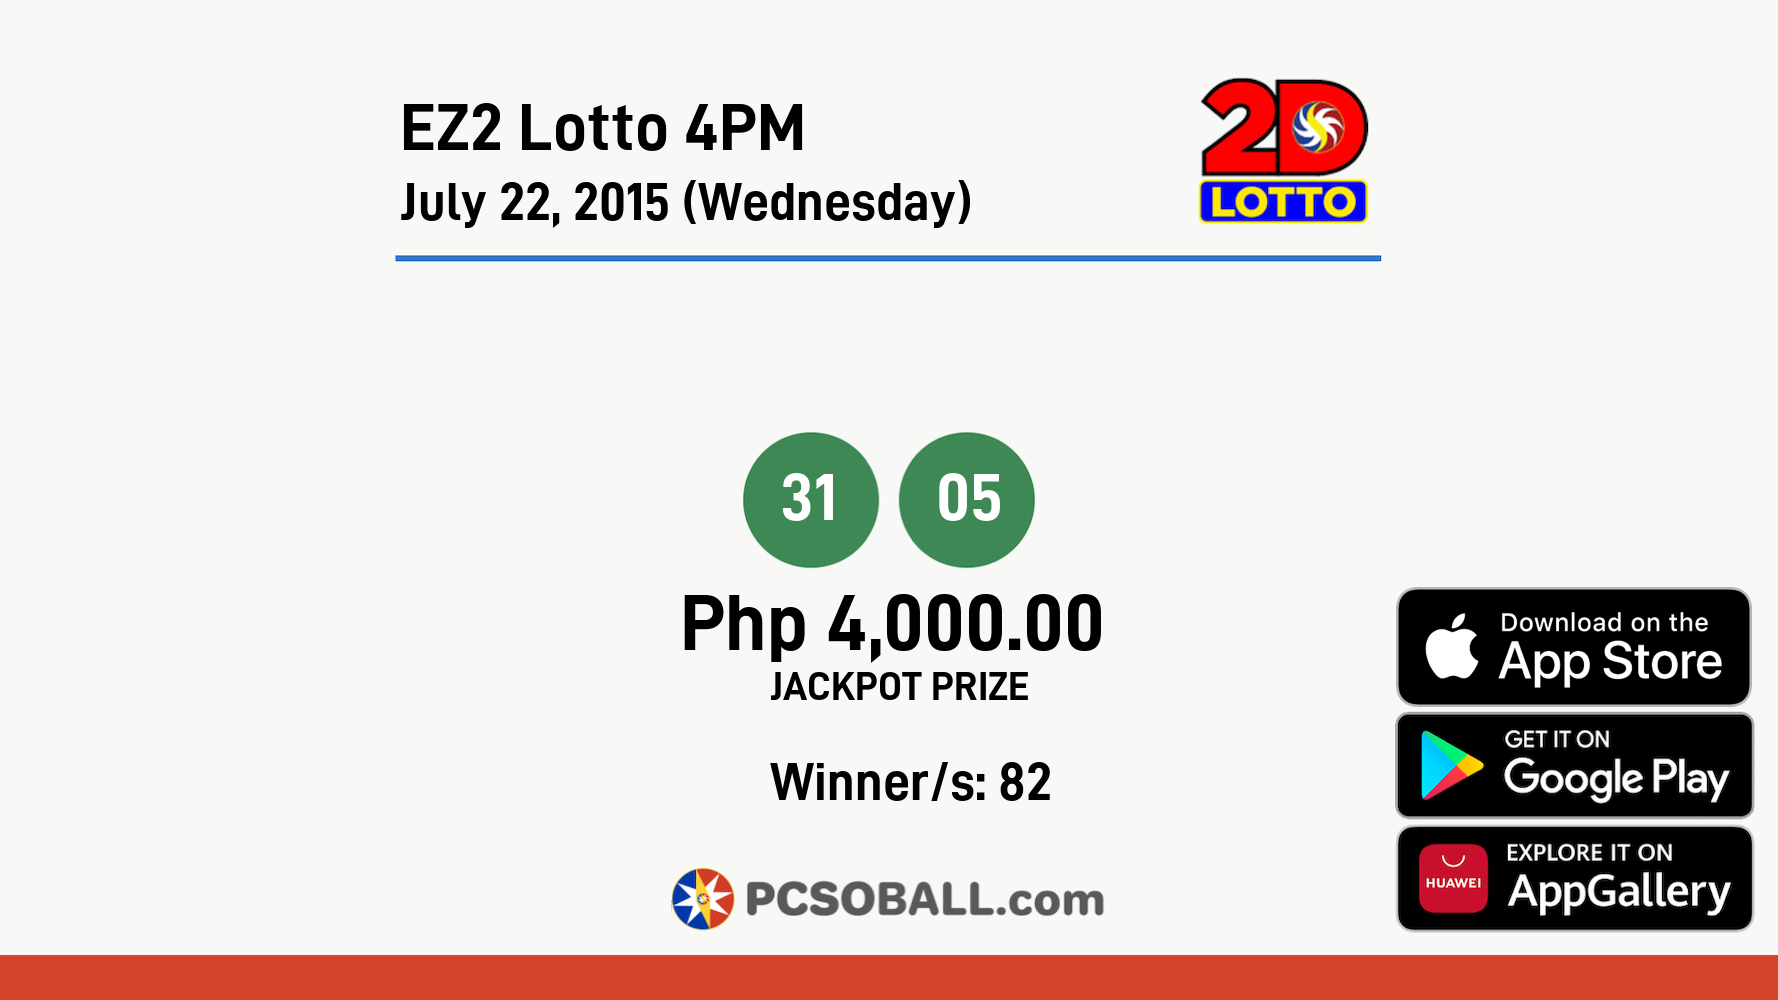 EZ2 Lotto 4PM July 22, 2015 (Wednesday) Result